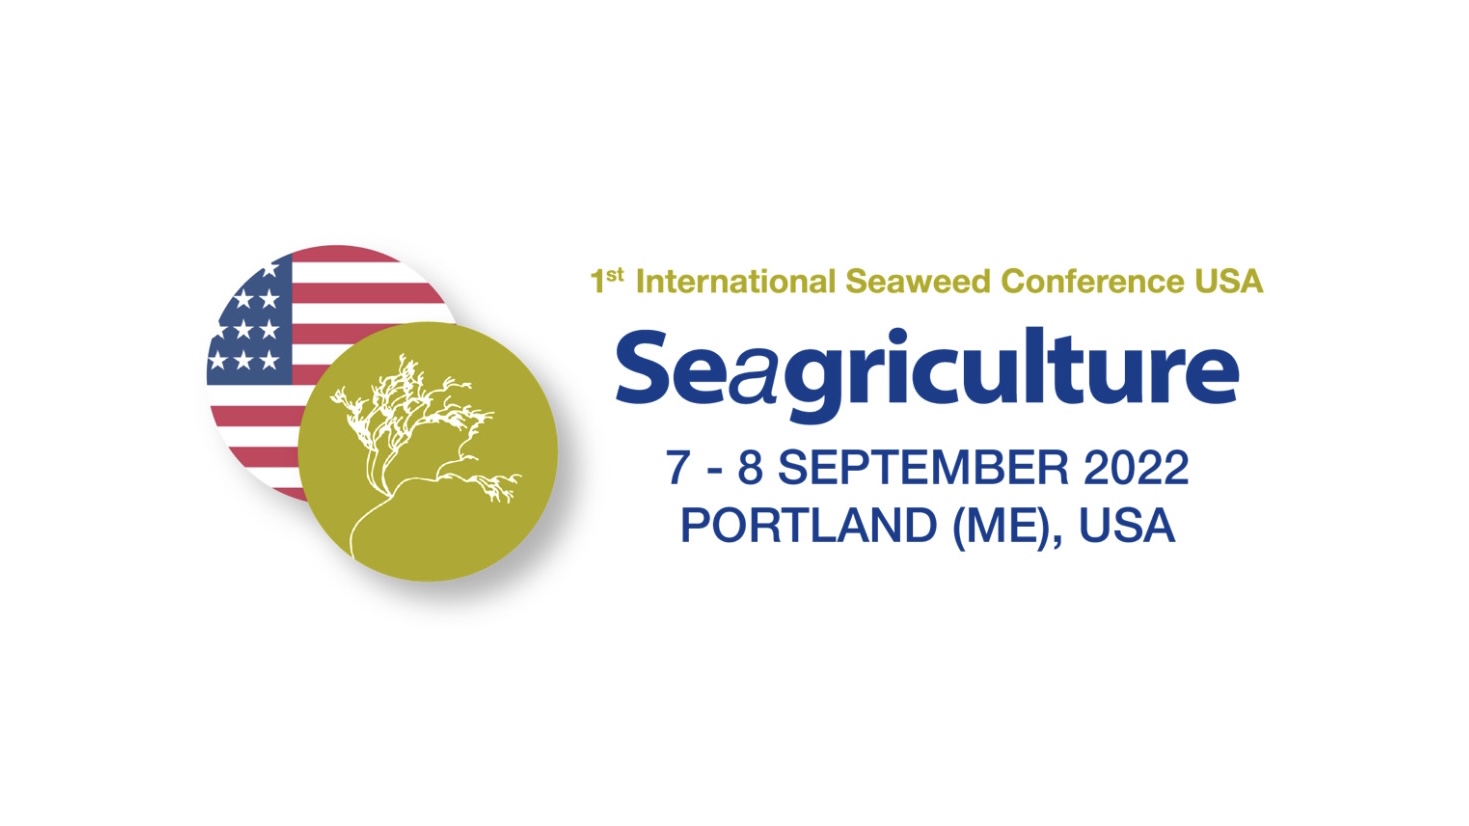 Seagriculture USA 2022 – 1st International Seaweed Conference USA, Portland, Maine, United States